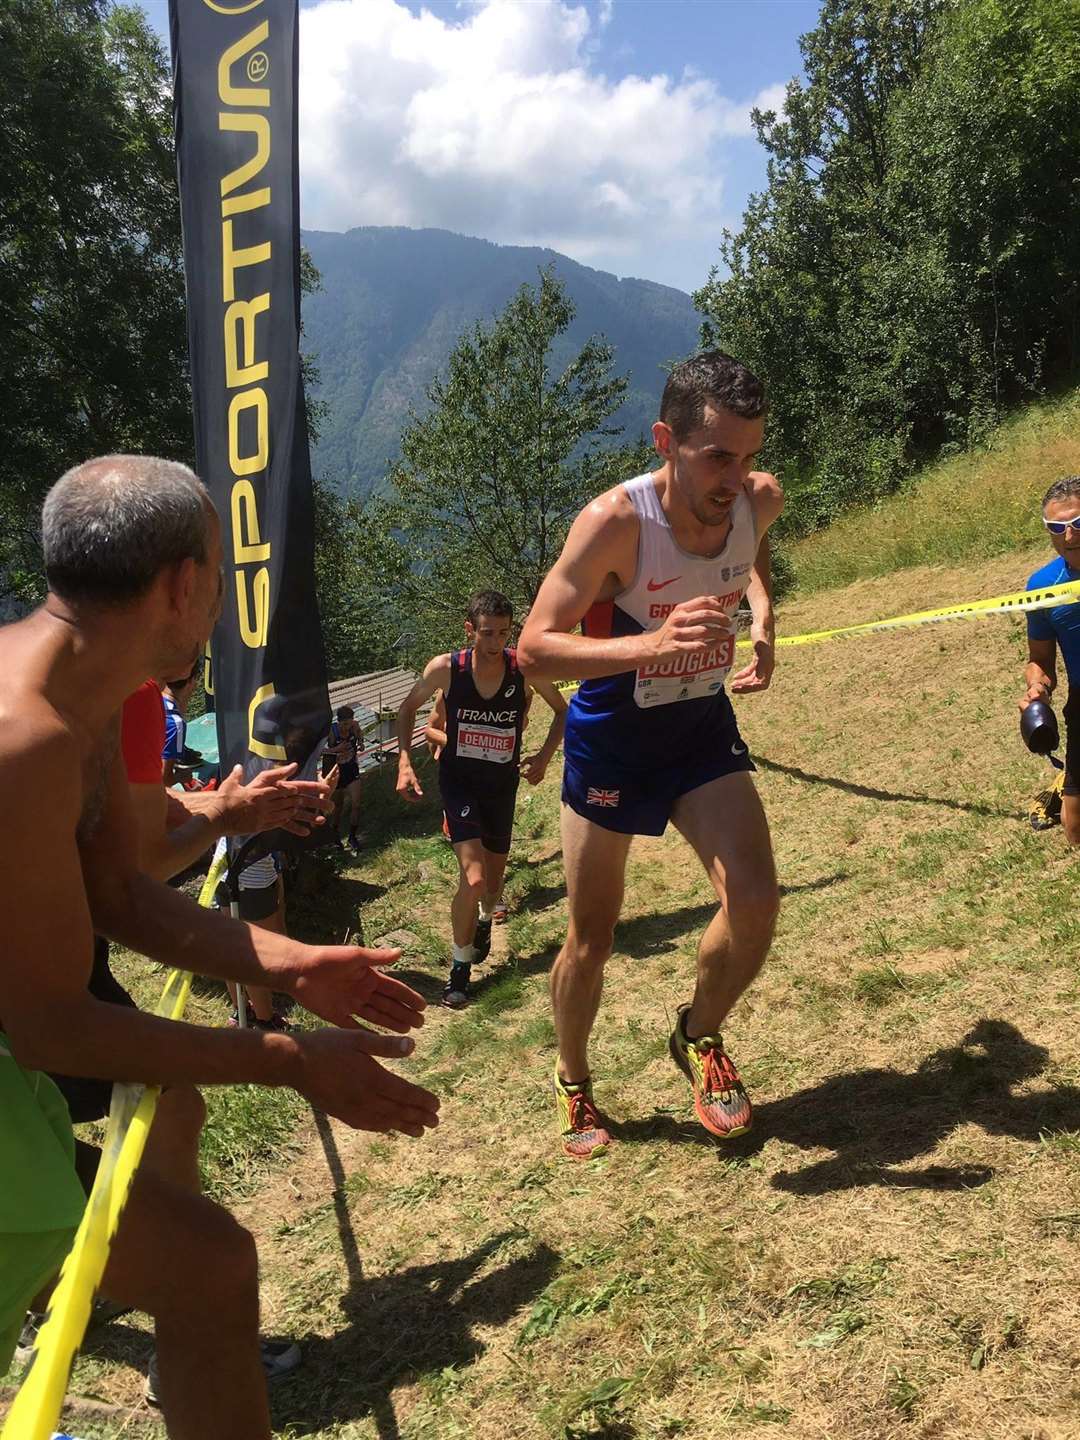 Andrew Douglas taking part in the European Mountain Running Championship in Italy last year.